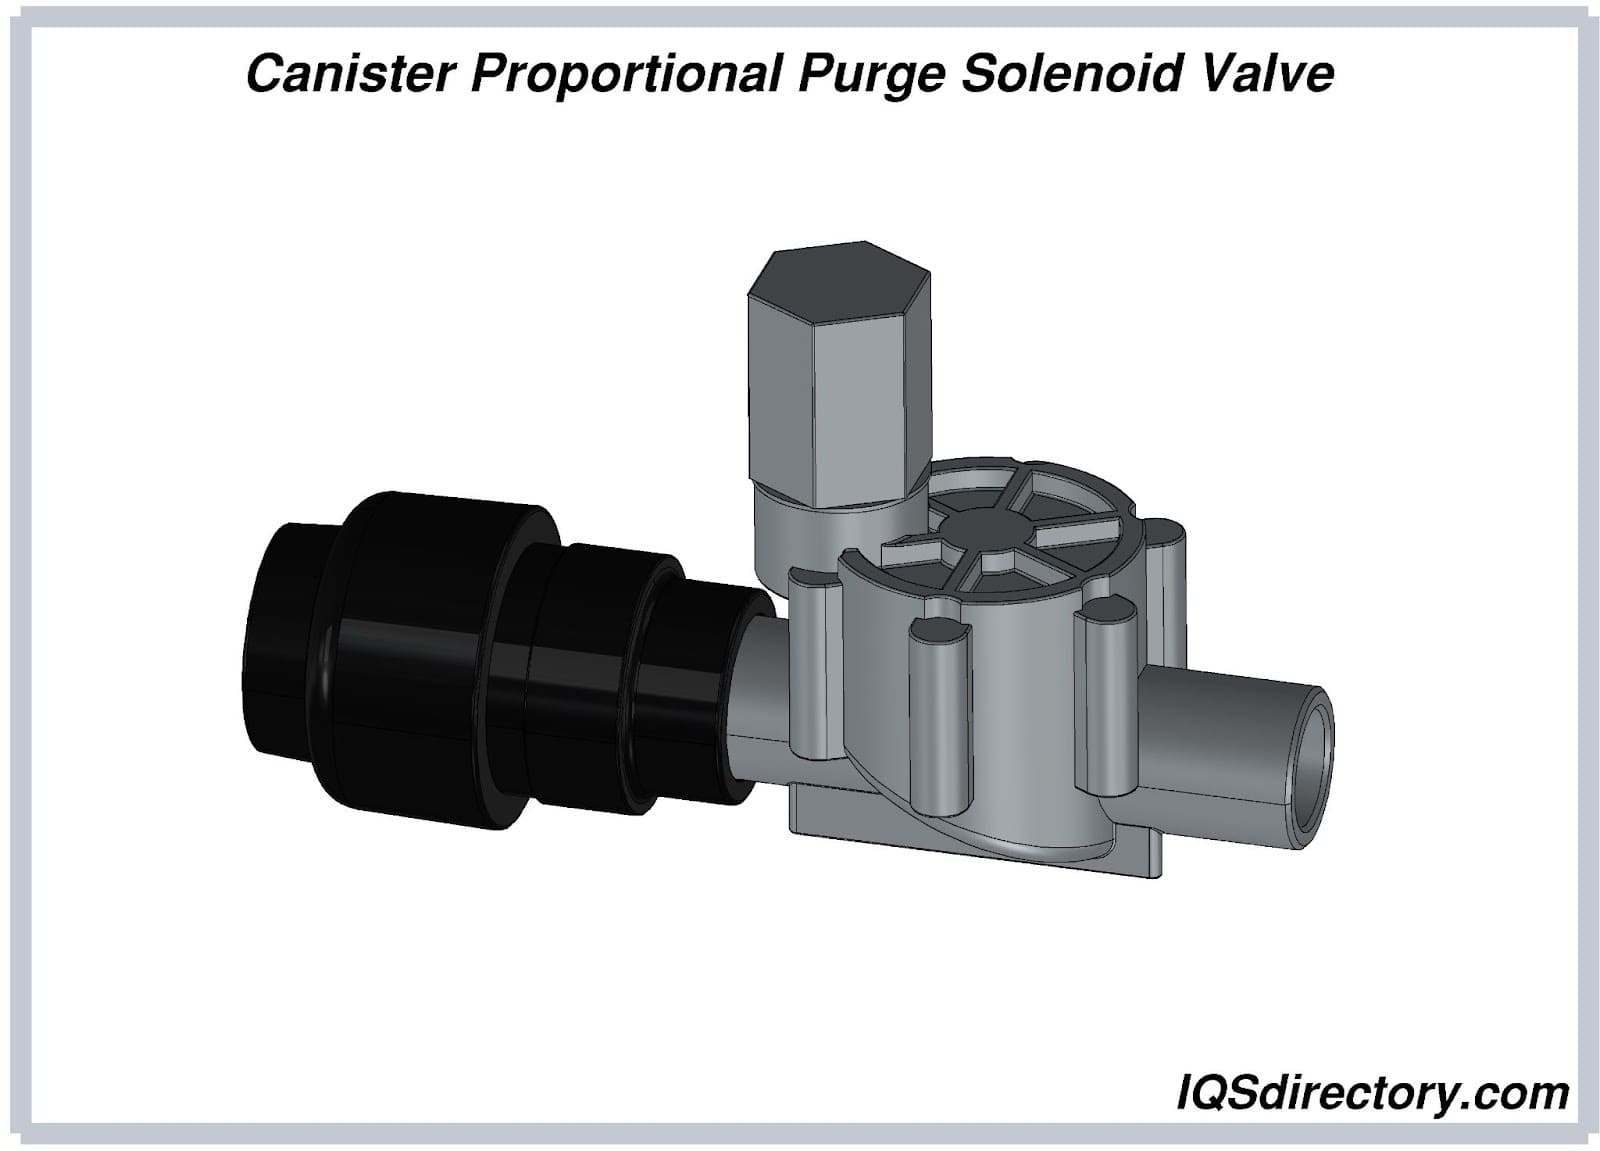 Canister Proportional Purge Solenoid Valve